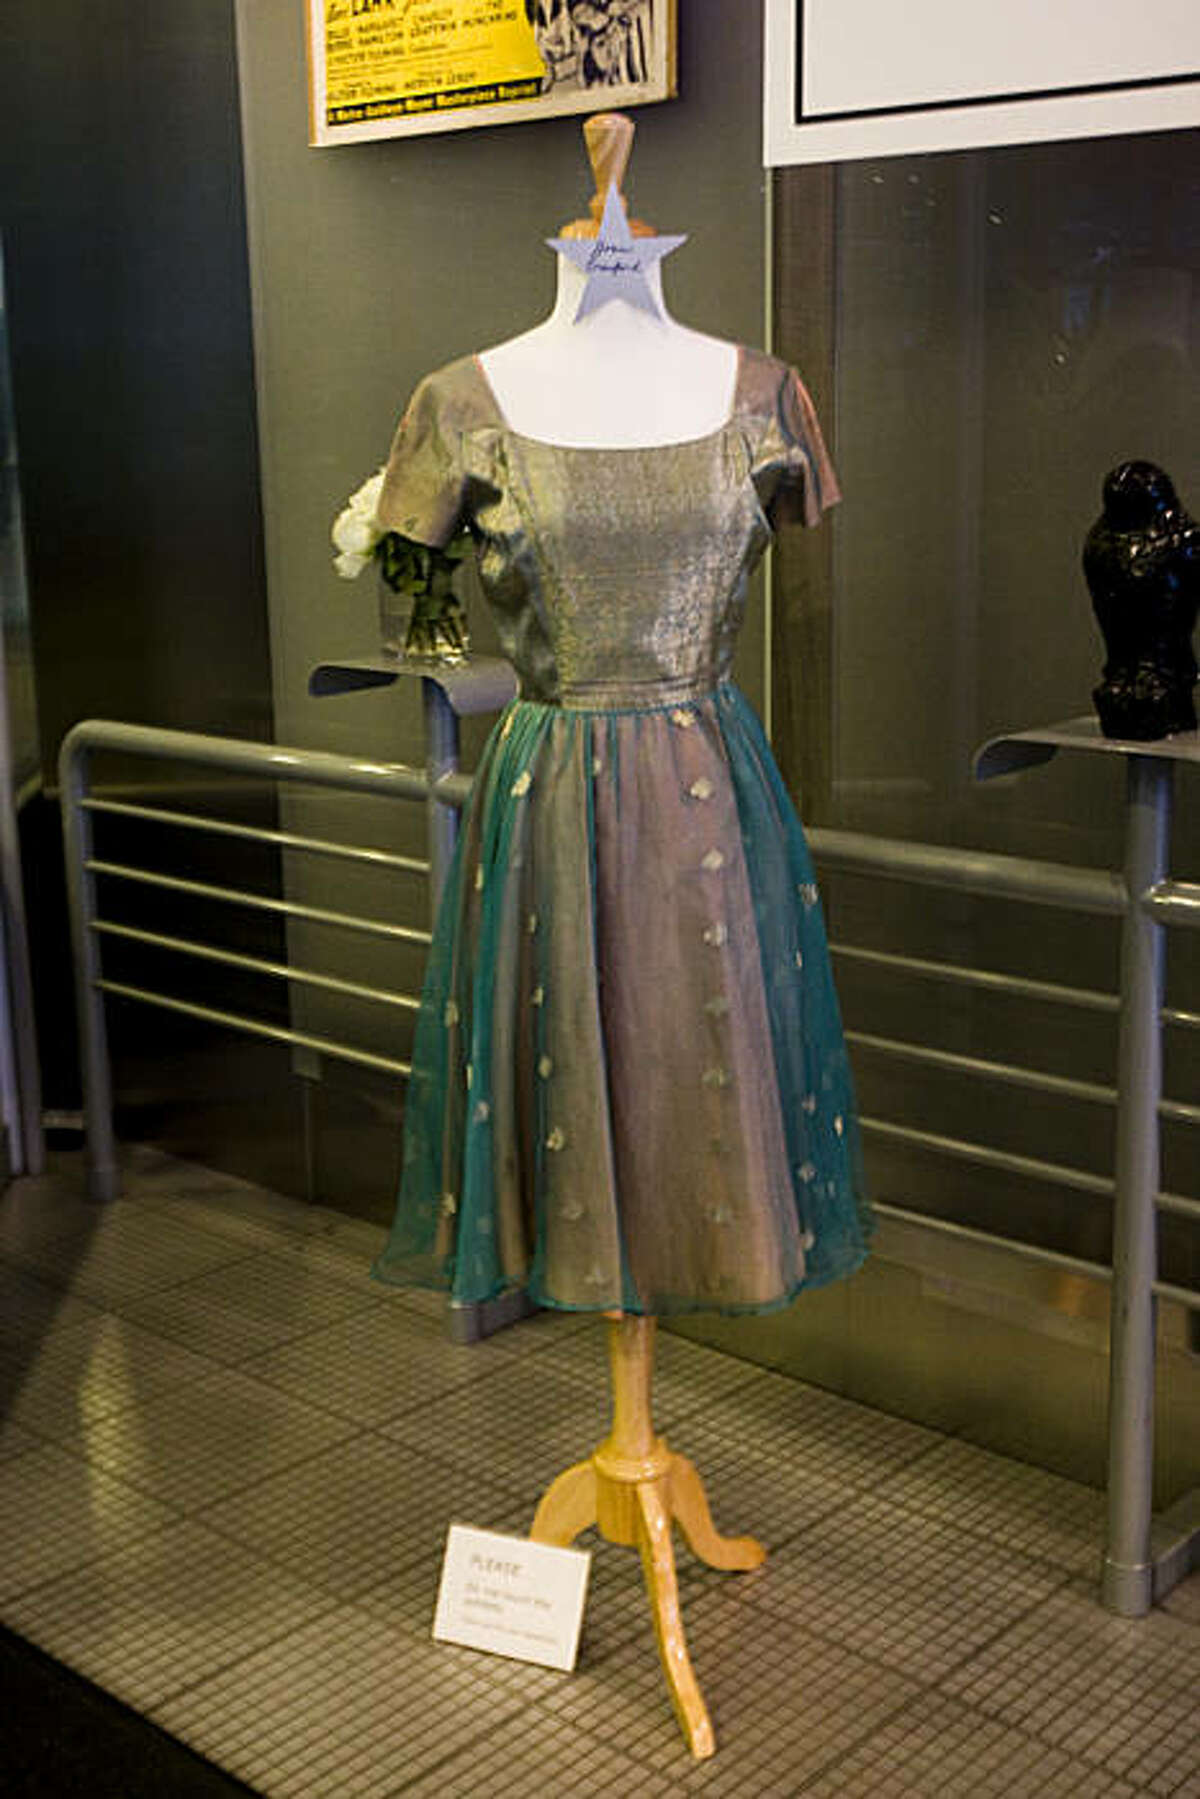 A dress worn by Joan Crawford hangs on display in the Metreon. Memorabilia from TV and movie stars is on display on the ground floor of the Metreon in San Francisco. The items are part of the "Hollywood Legends: The Barry Barsamian Collection" exhibit and will be on display until the end of May.